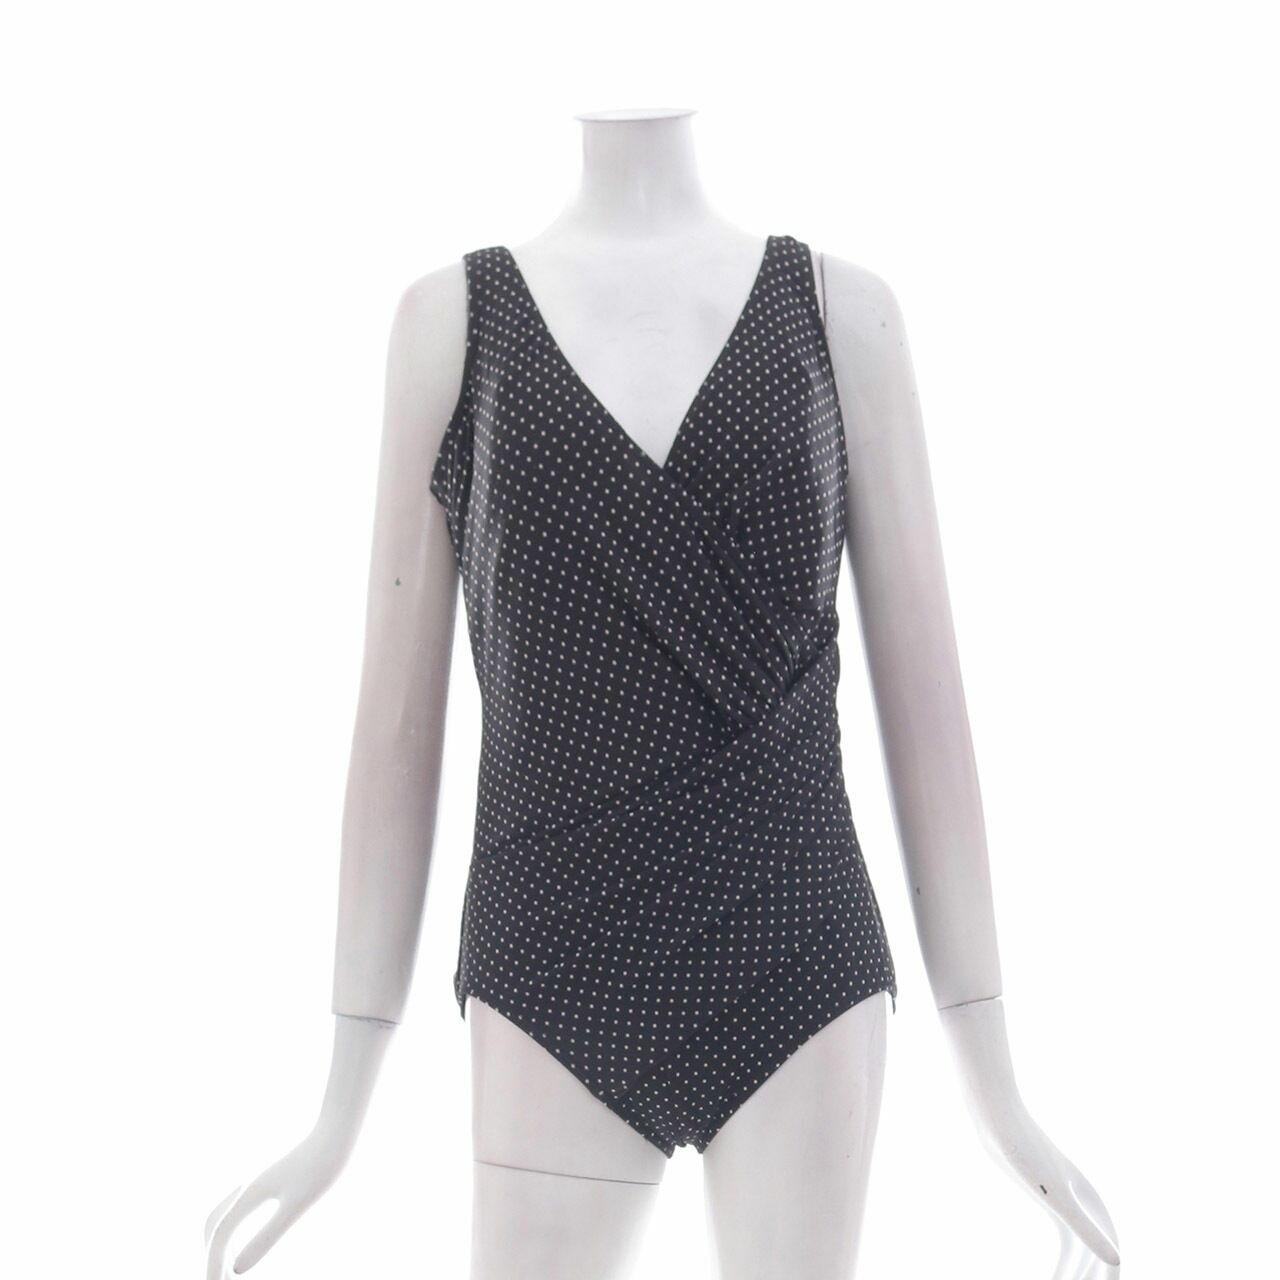 Miraclesuit Black & White Polkadots One Piece